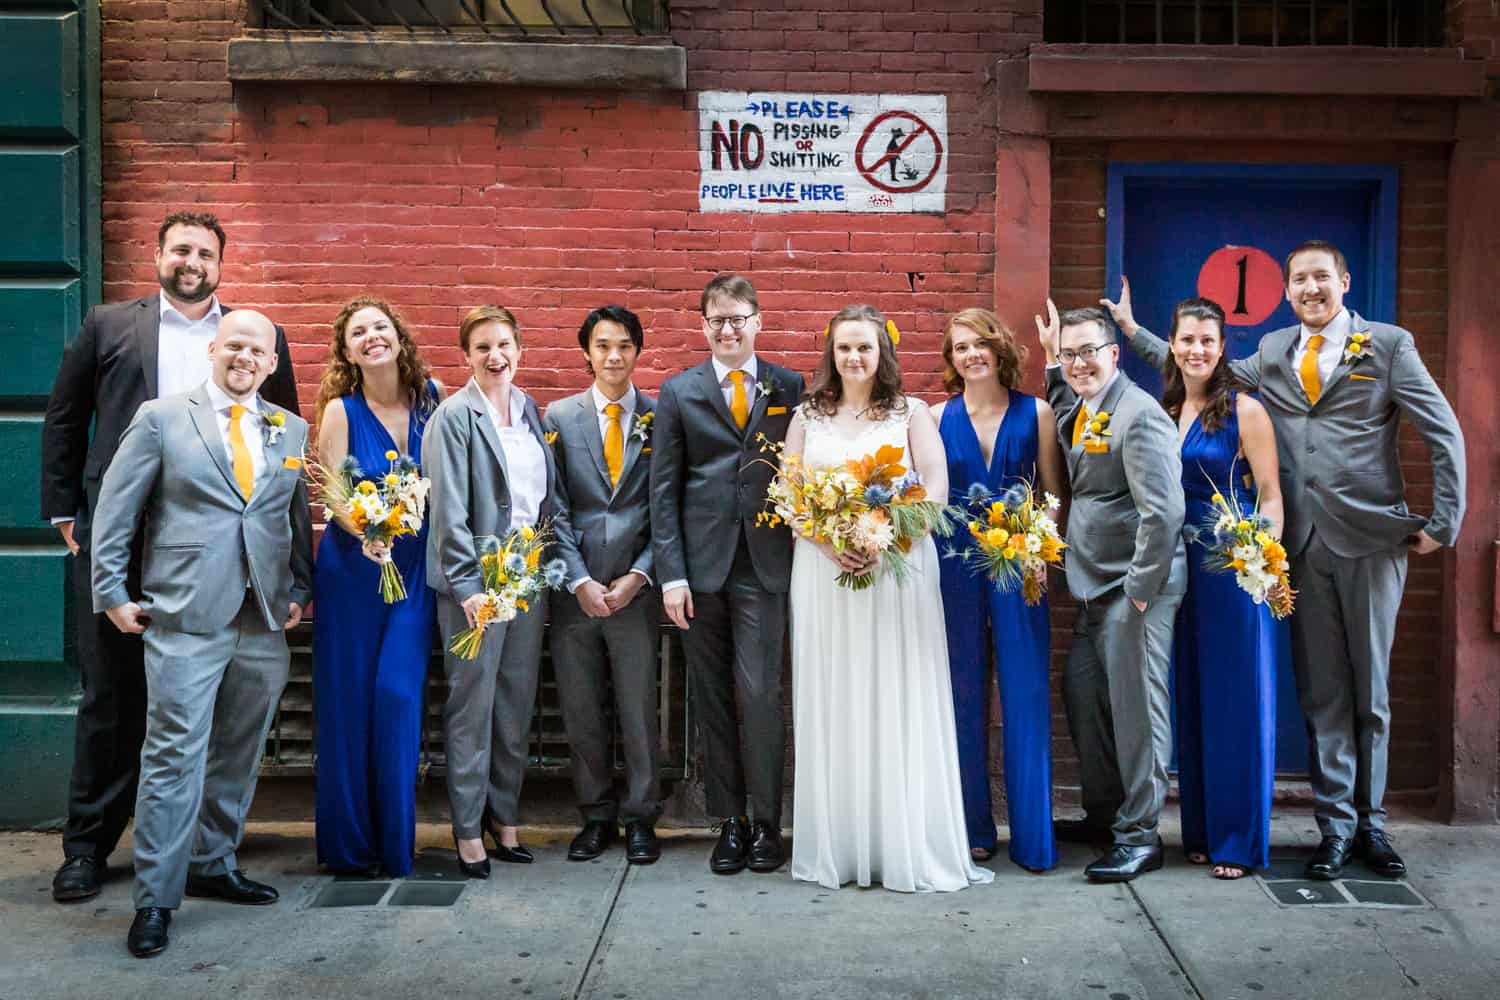 Bridal party standing in front of sign for an article on Covid-19 wedding planning